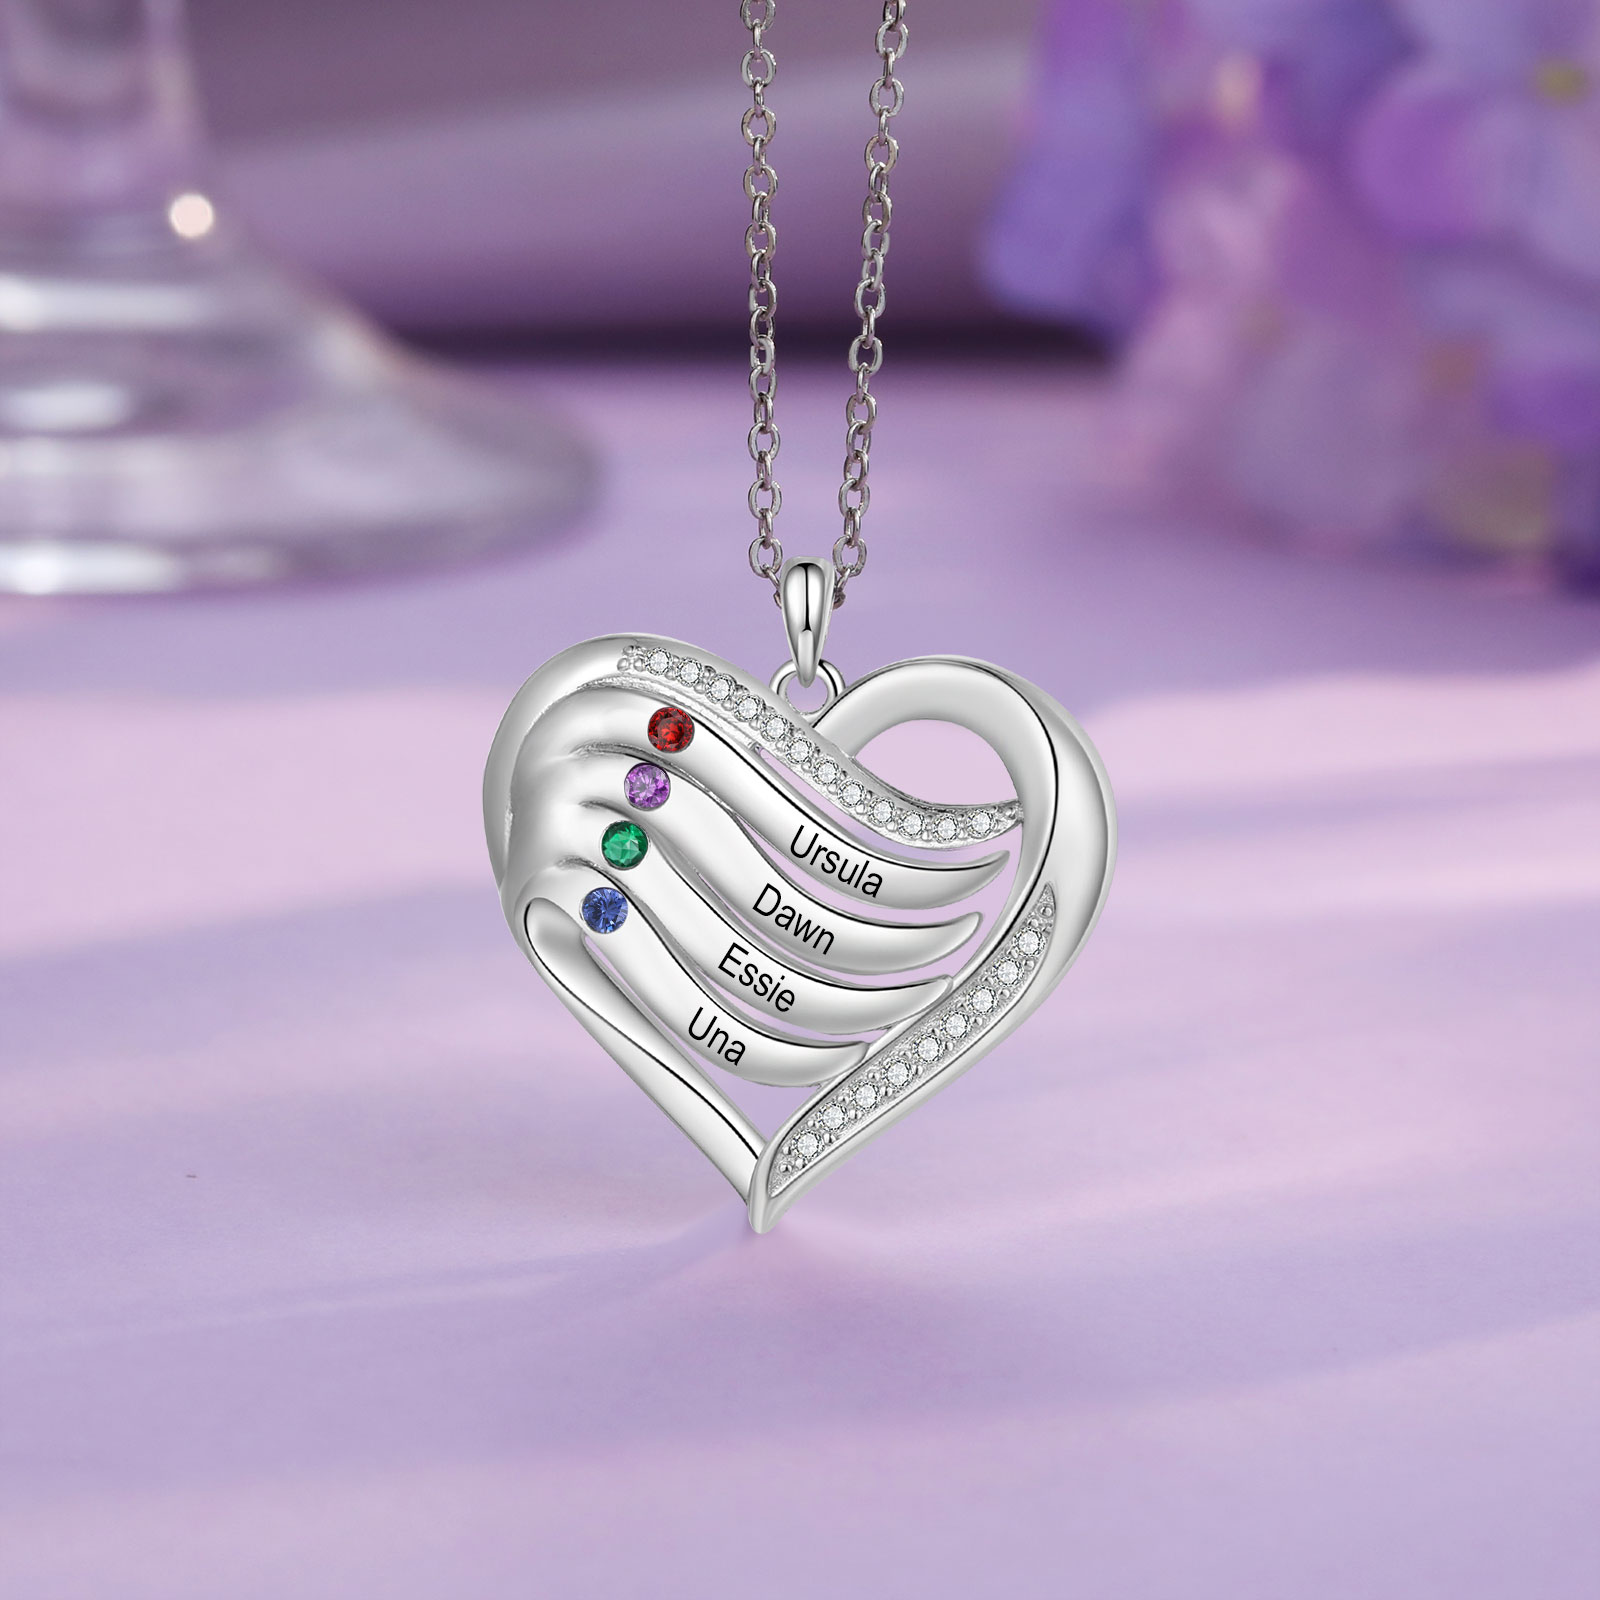 4 Names - Personalized S925 Silver Heart Necklace with Birthstone and Name, Beautiful Gift for Her